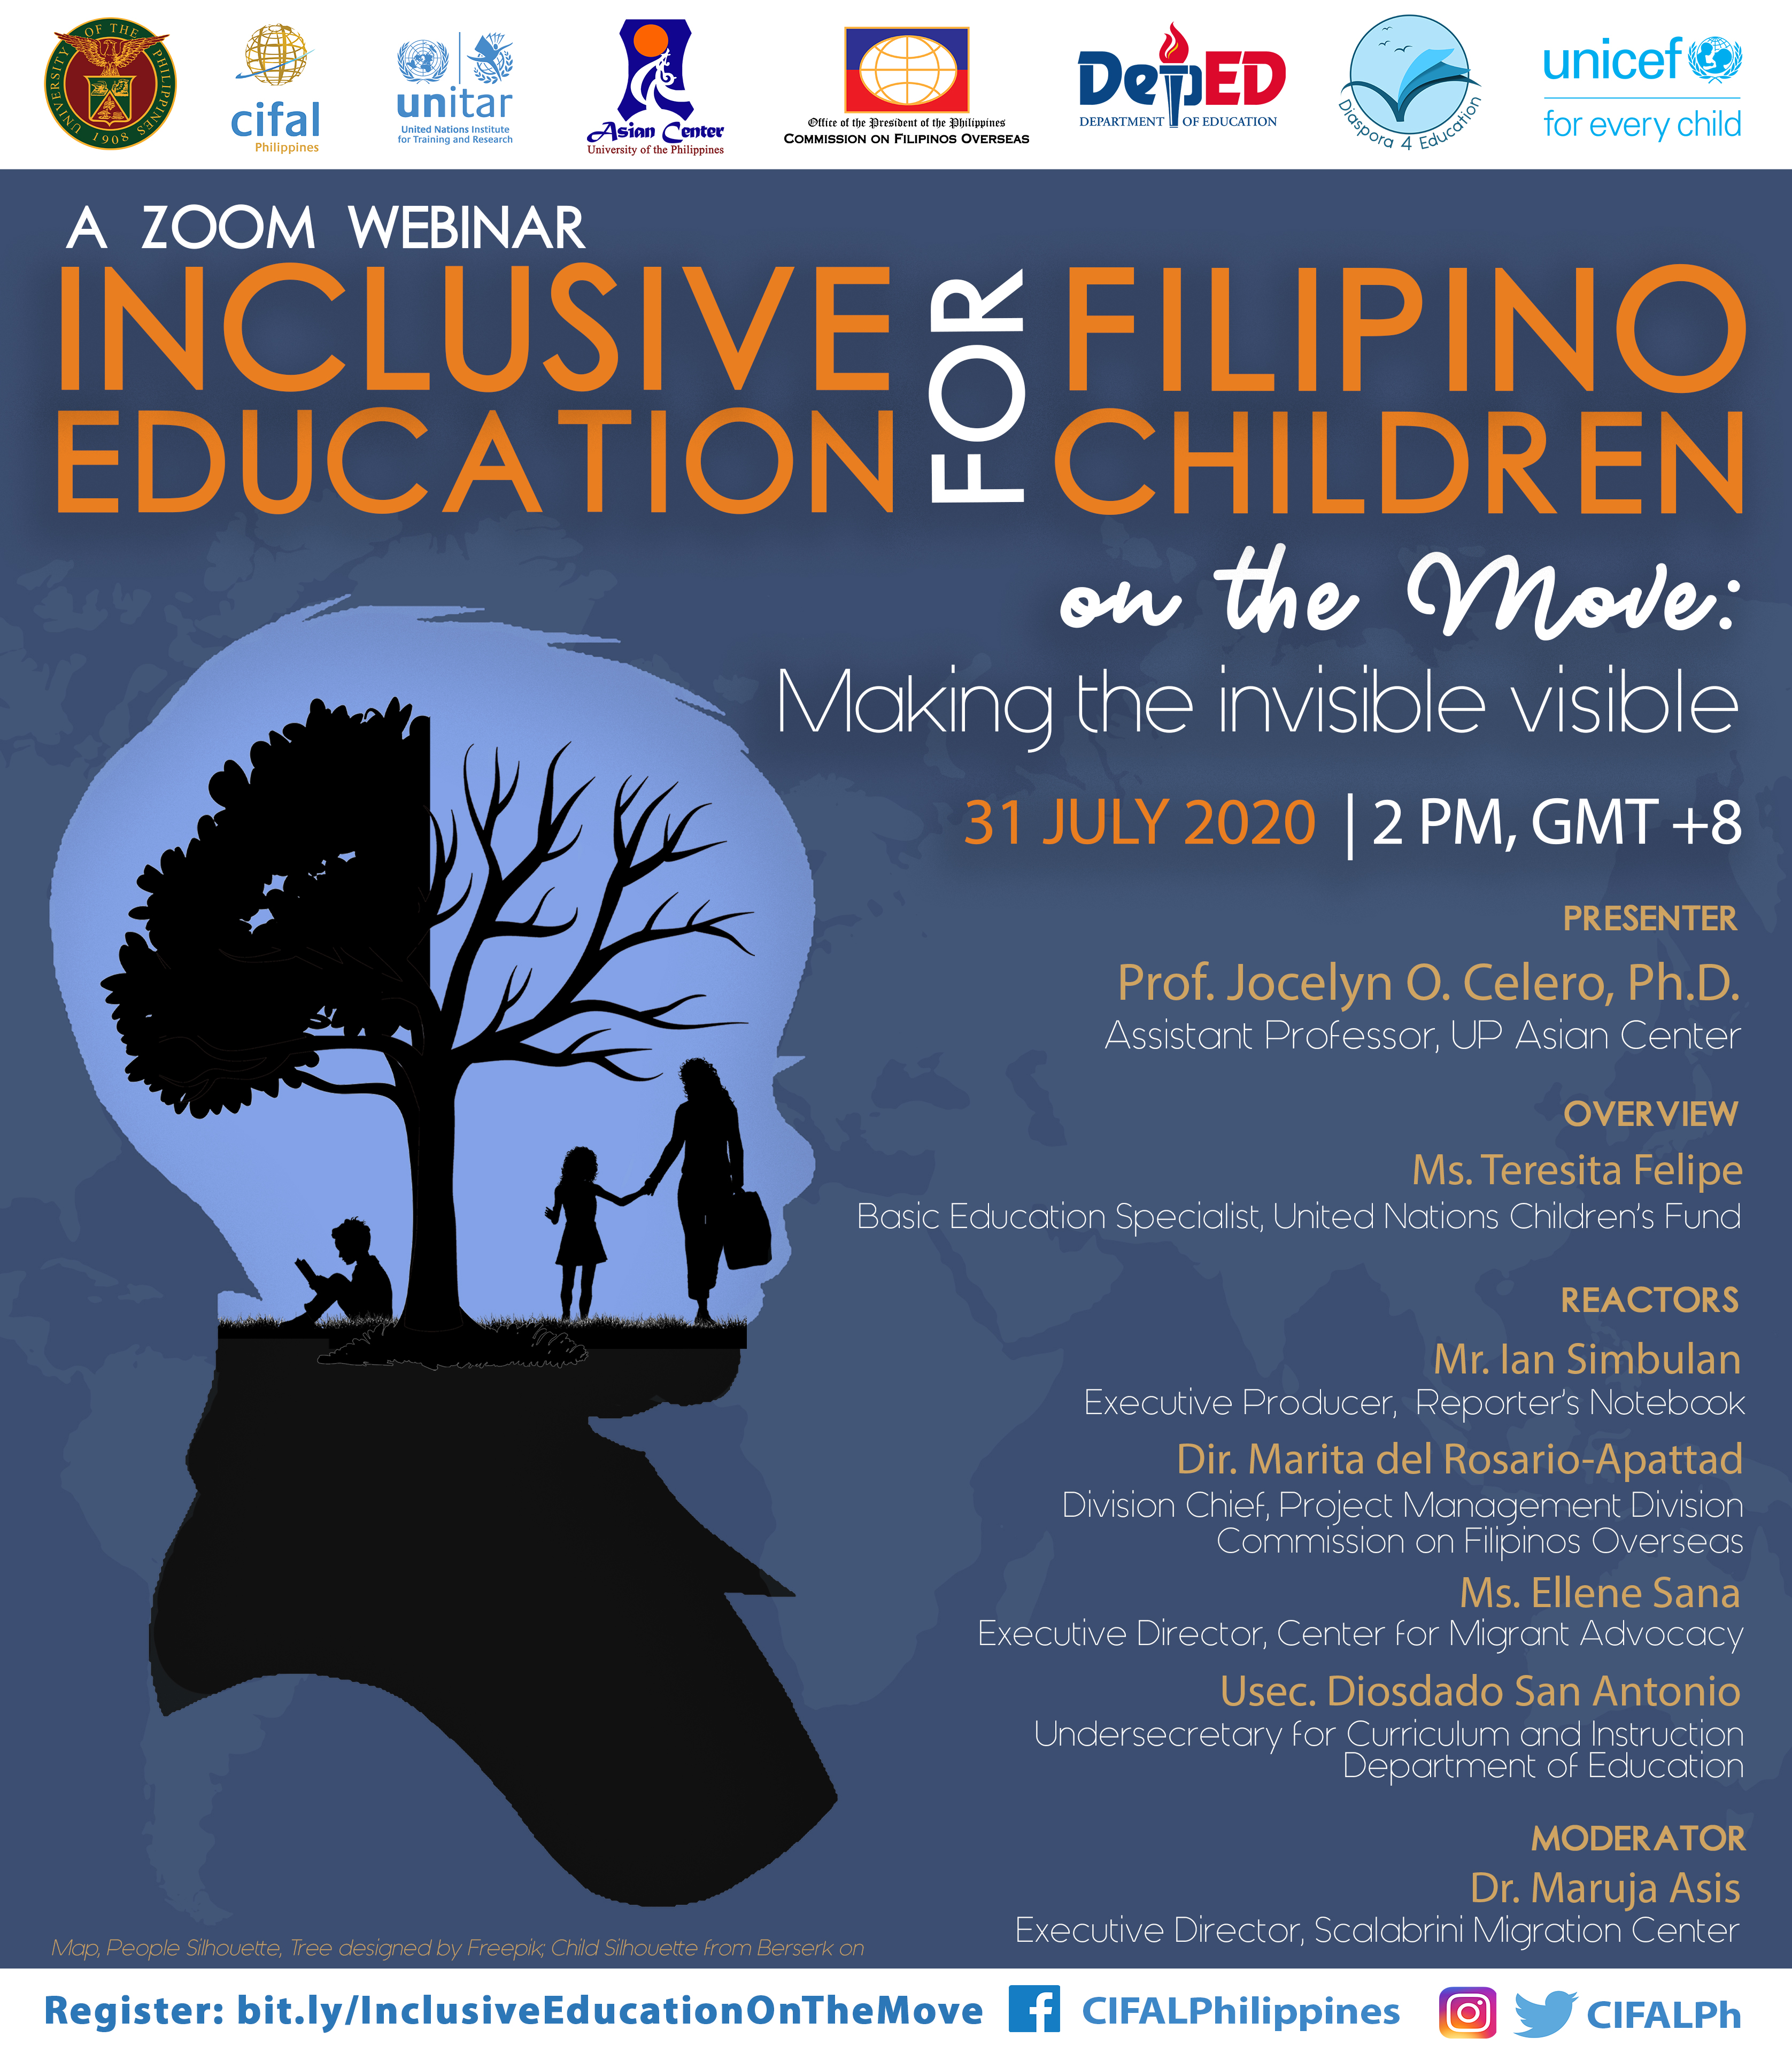 WEBINAR-Inclusive Education for Filipino Children on the Move: Making the Invisible Visible